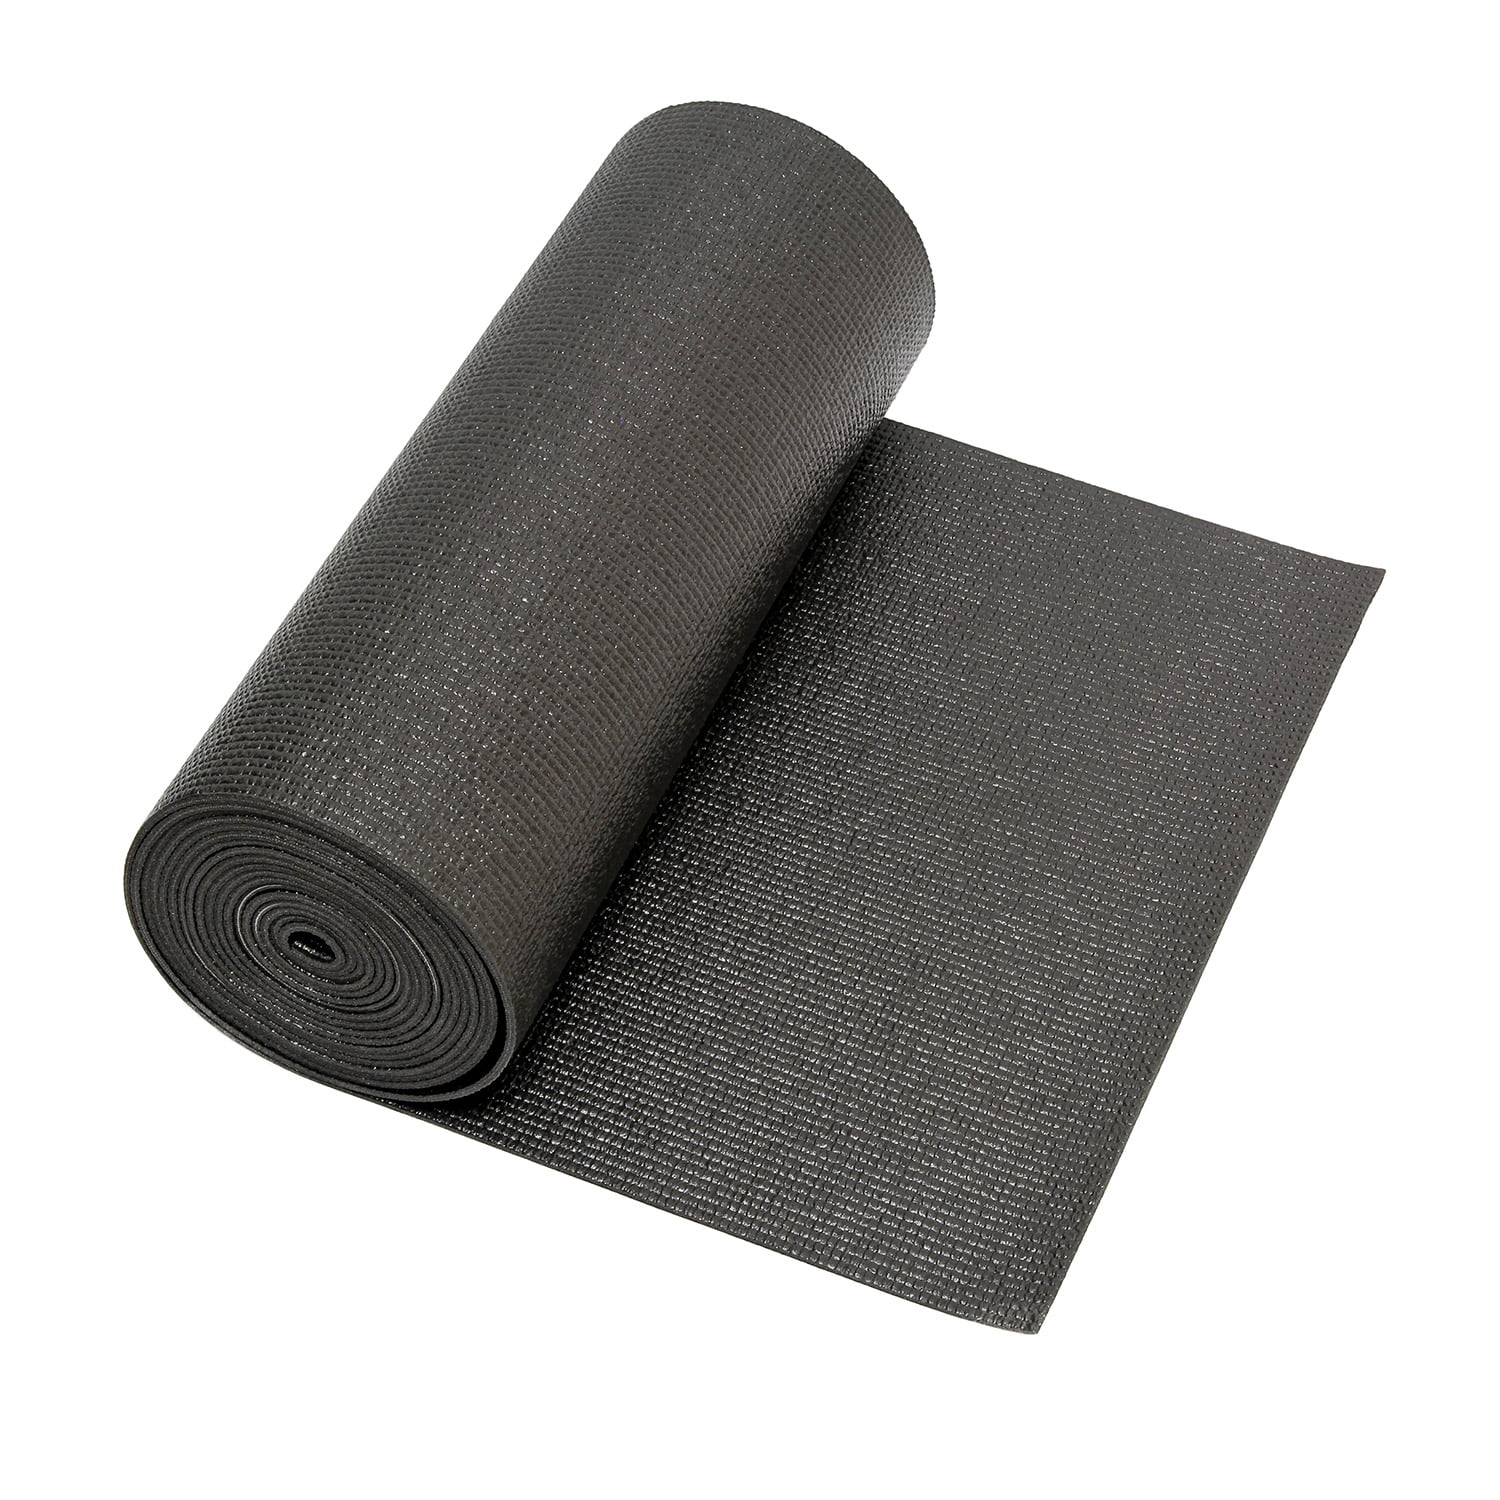 Black 16 inch x 16 feet Non-Slip Shelf Liner Is Perfect For Protecting Your Tools Professional Tool Box Liner and Drawer Liner These Thick Cabinet Liners Are Easily Adjustable To Fit Any Space B&C Home Goods 